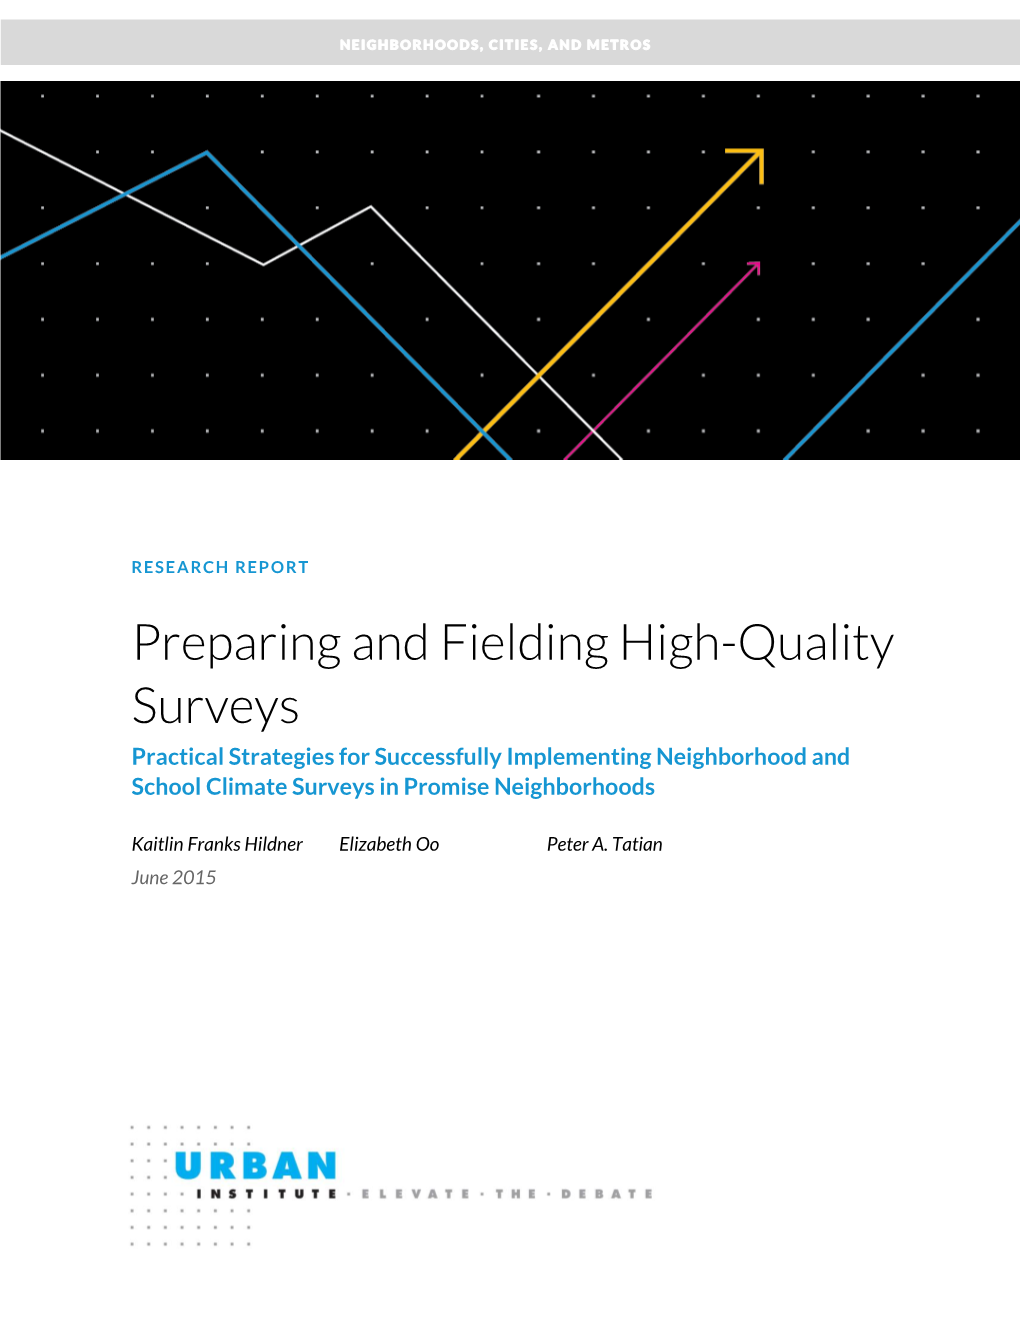 Preparing and Fielding High-Quality Surveys Practical Strategies for Successfully Implementing Neighborhood and School Climate Surveys in Promise Neighborhoods